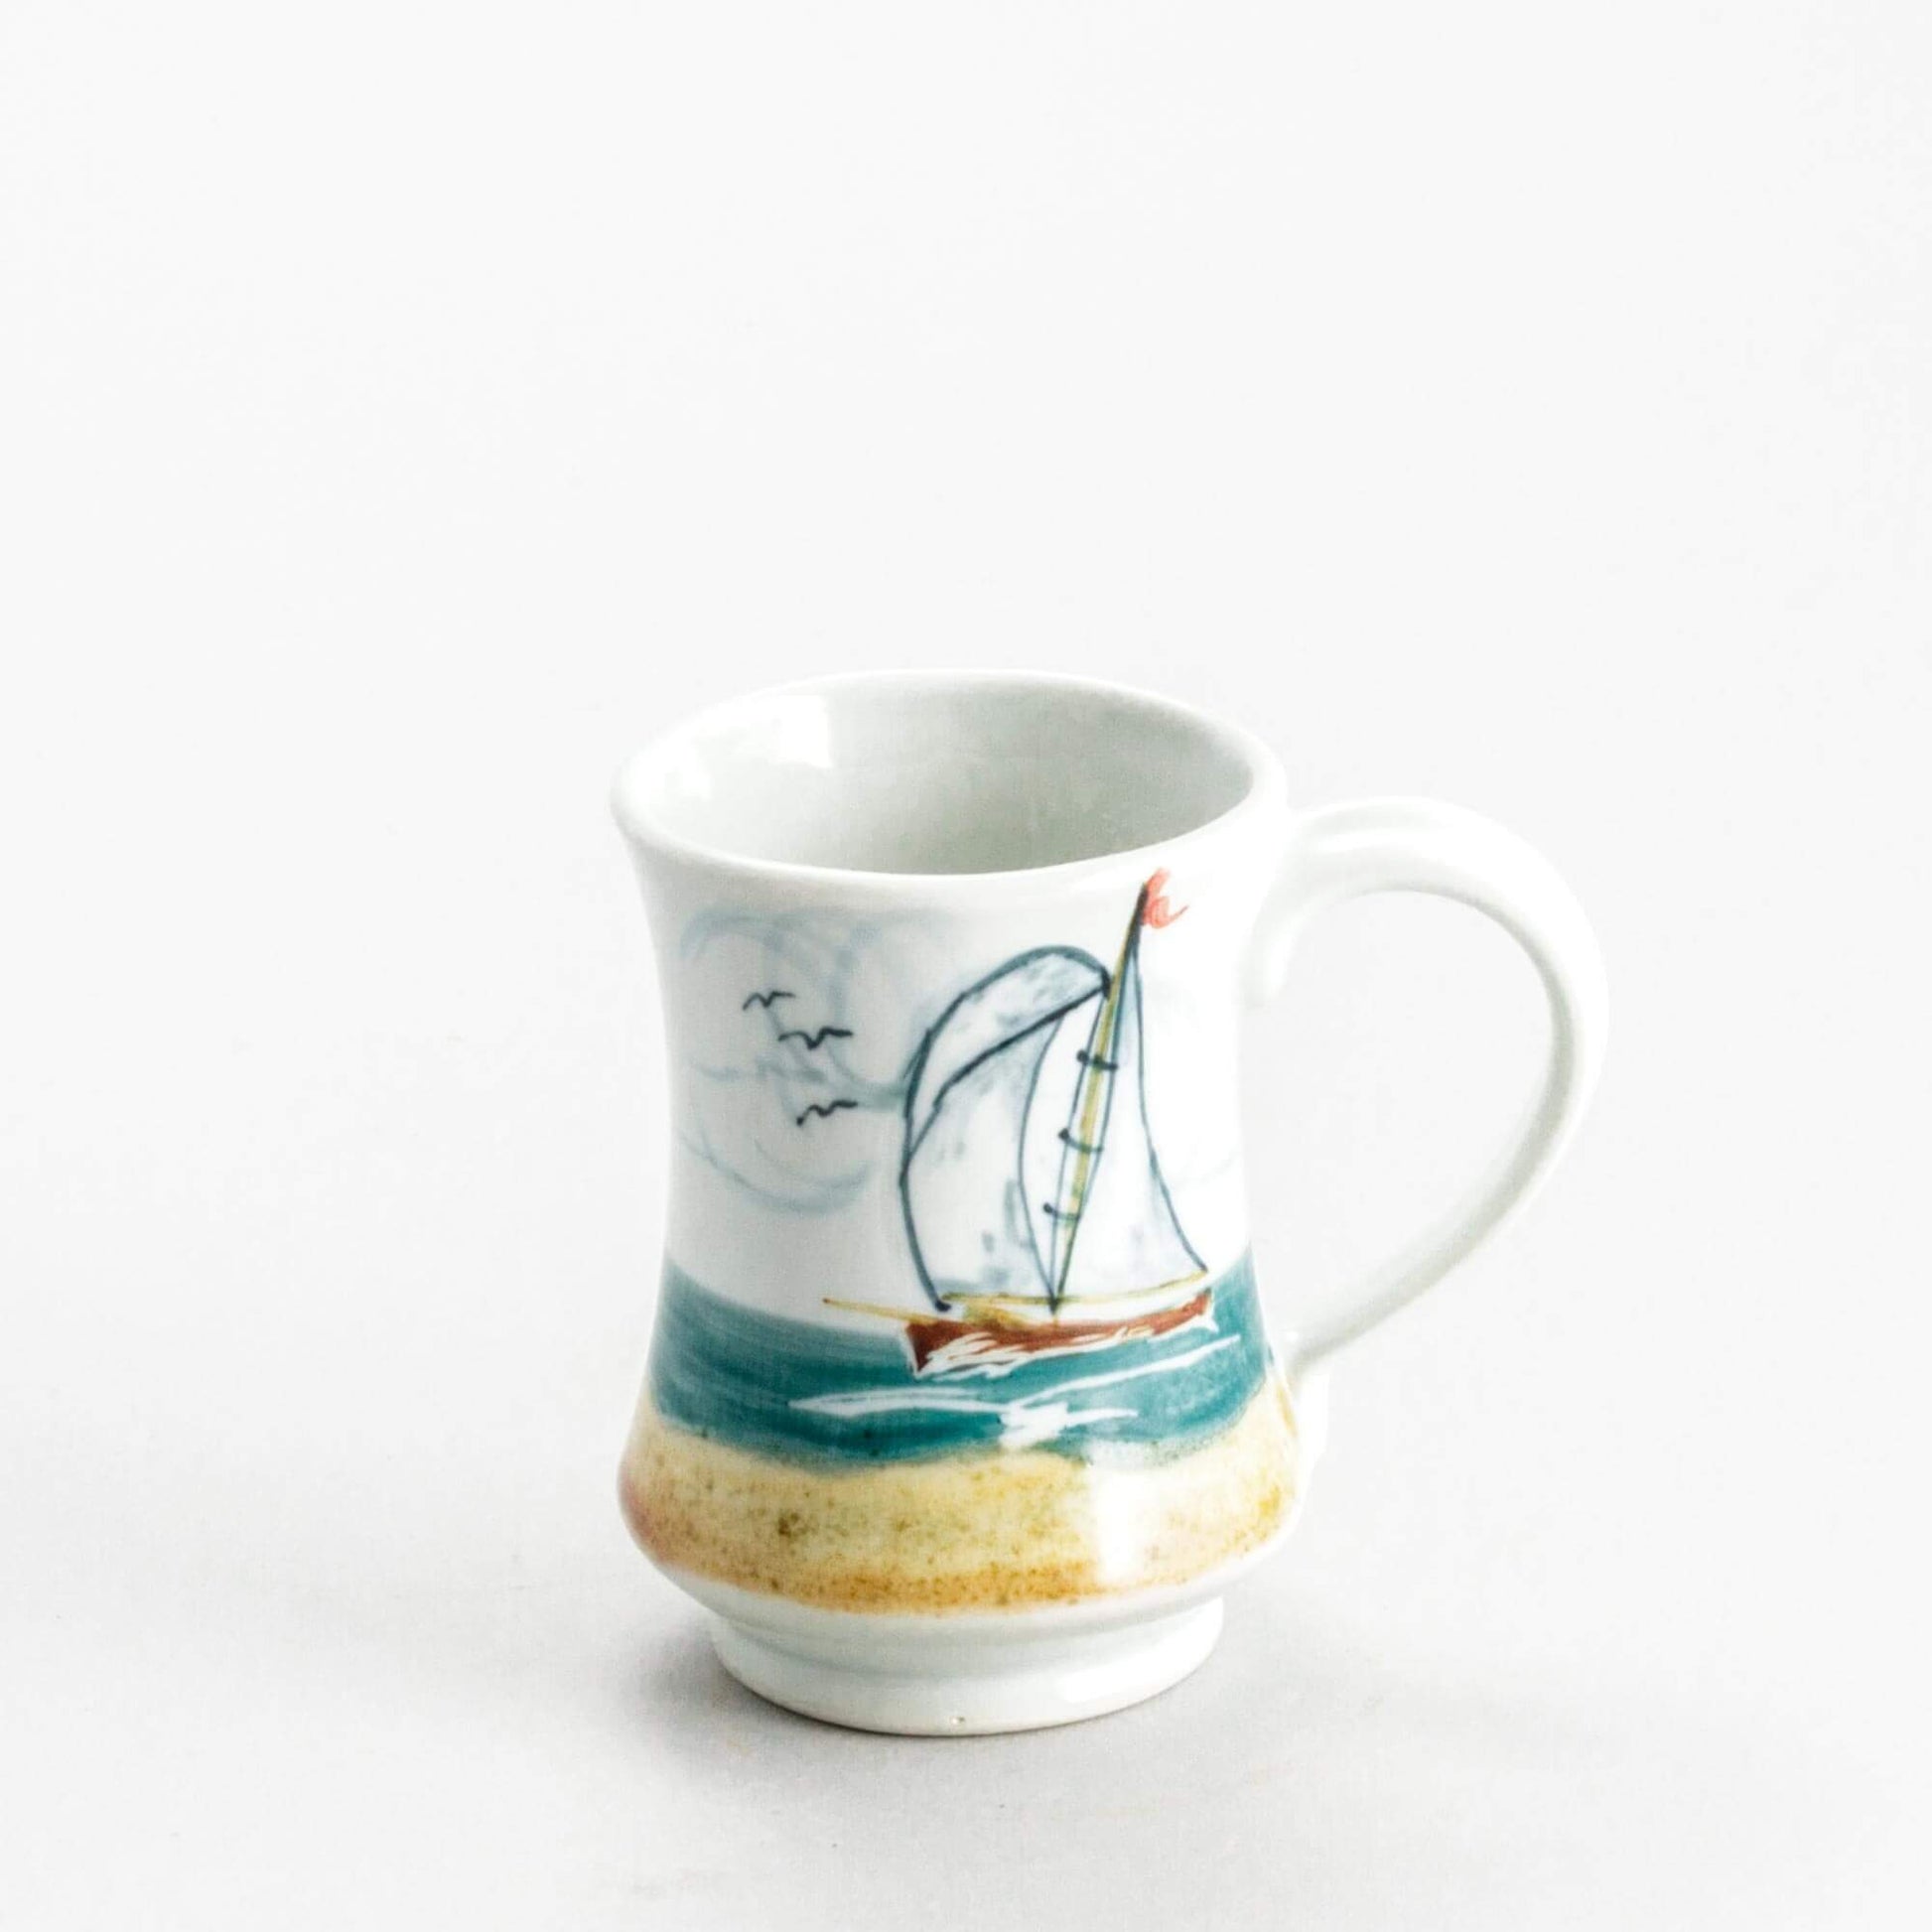 Handmade Pottery Pedestal Mug made by Georgetown Pottery in Maine Sailboat